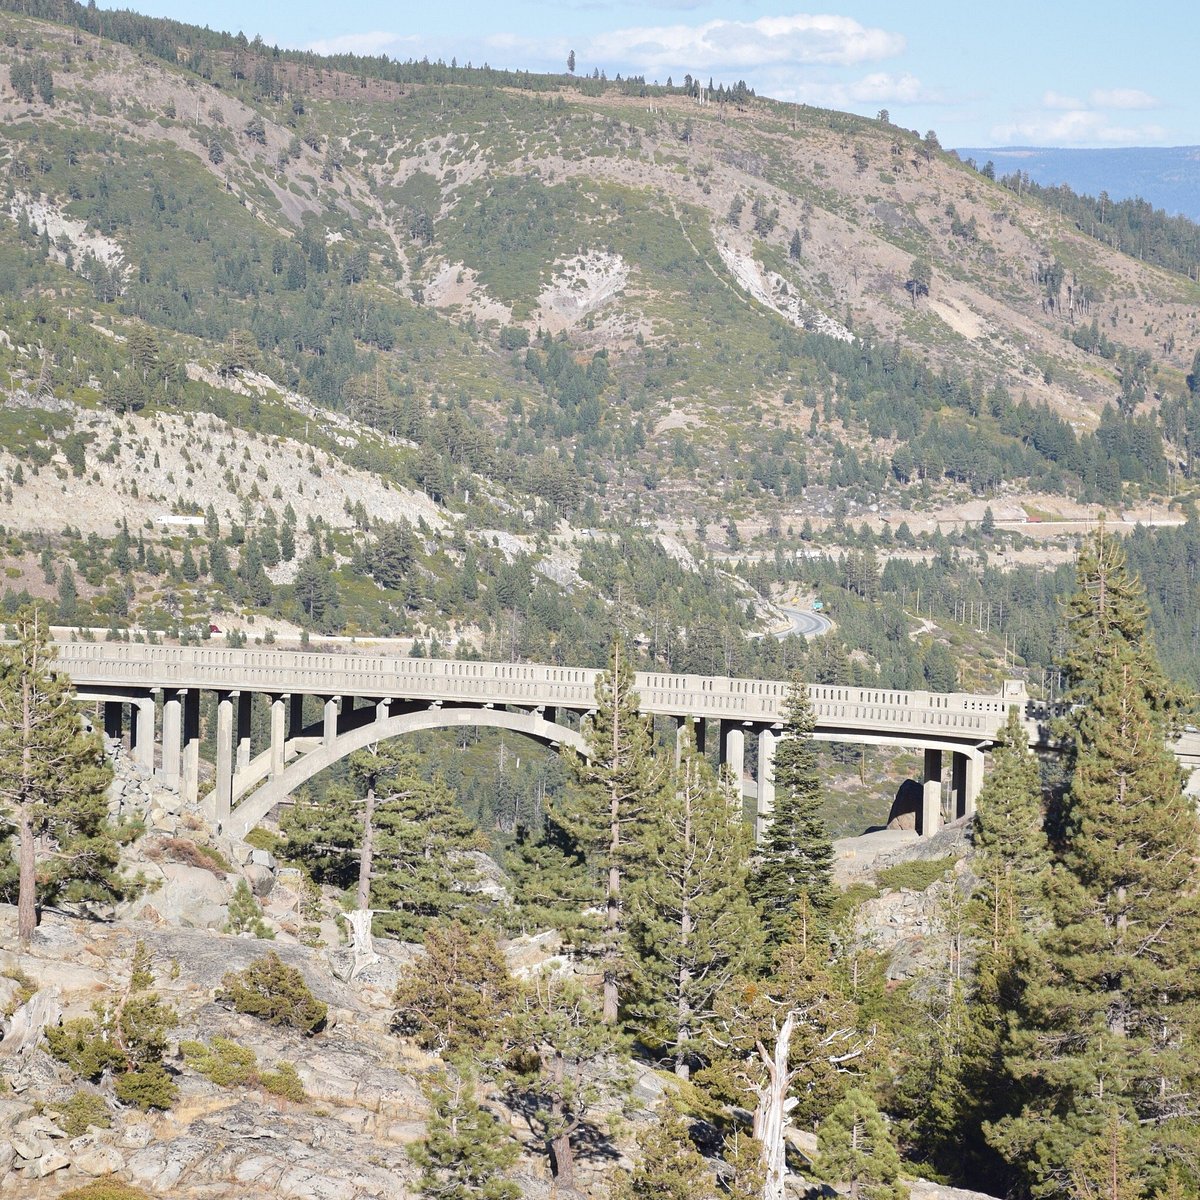 List 100+ Images pictures of donner pass today Latest